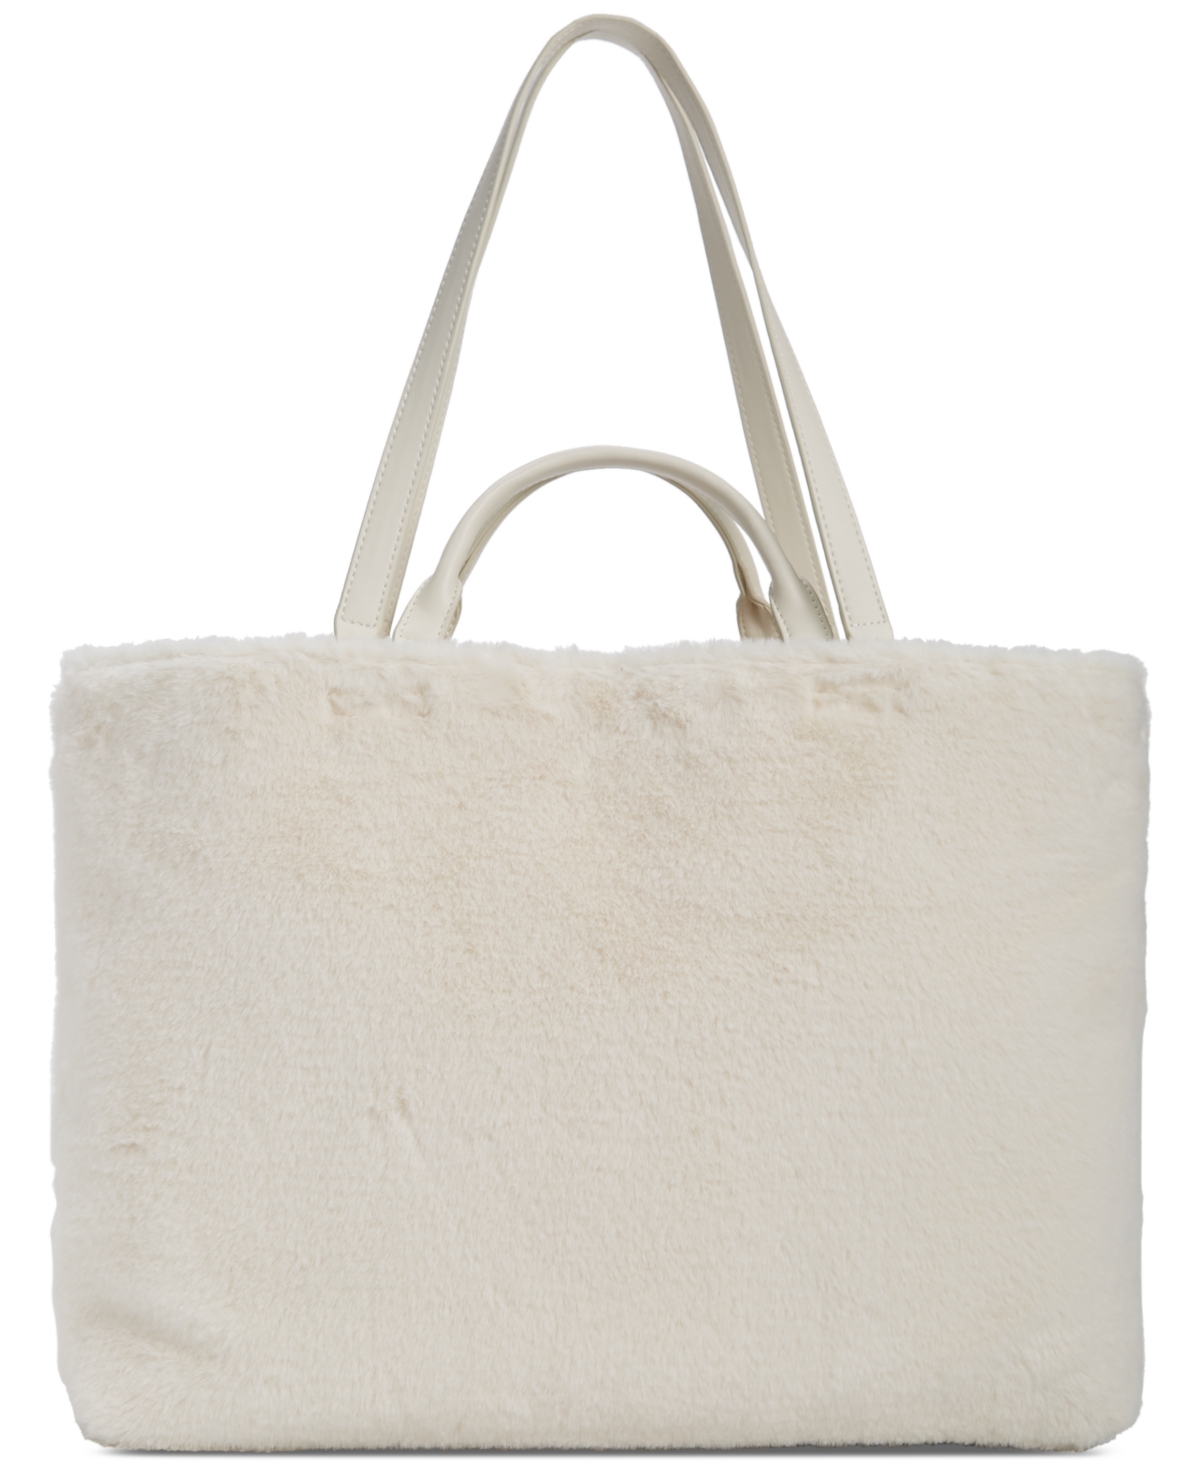 Leightonne Extra-Large Tote, Created for Macy's - Travertine